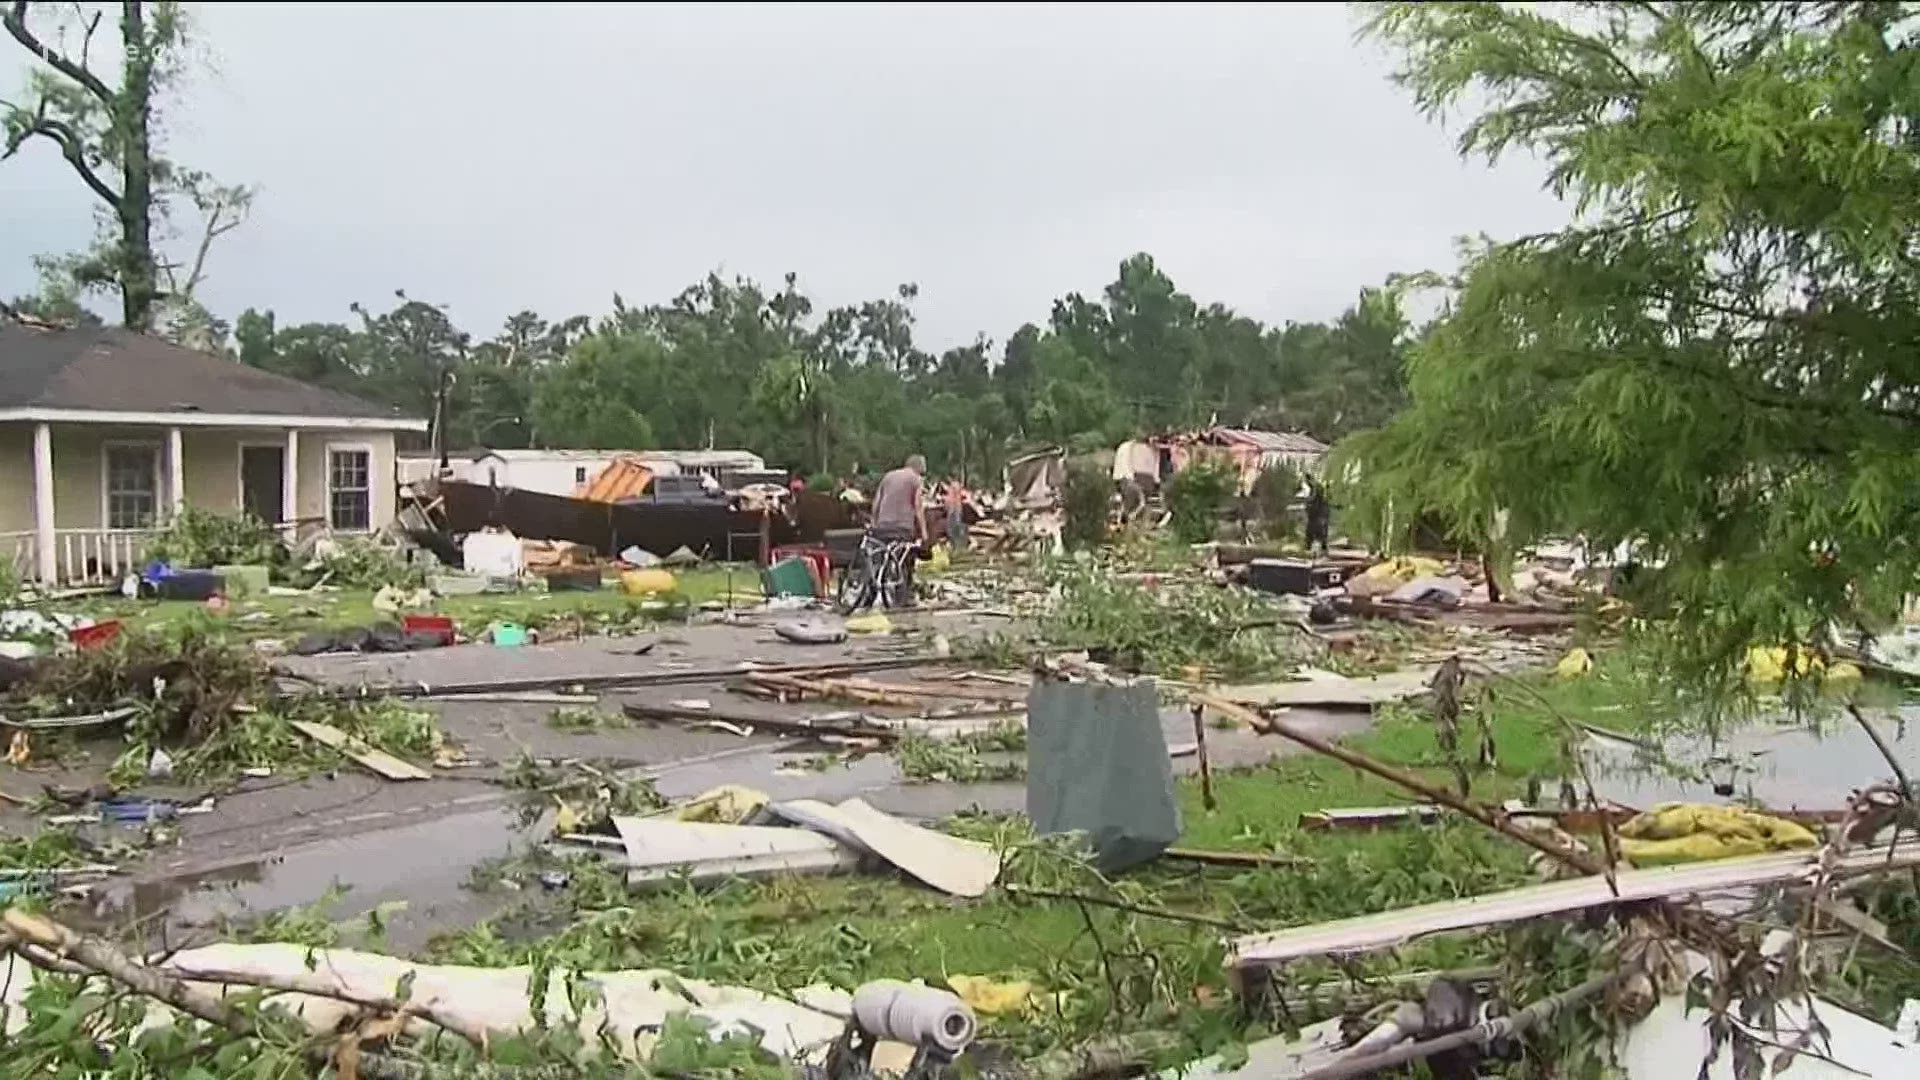 There was a suspected tornado in a small town of Alabama just north of the Florida panhandle.